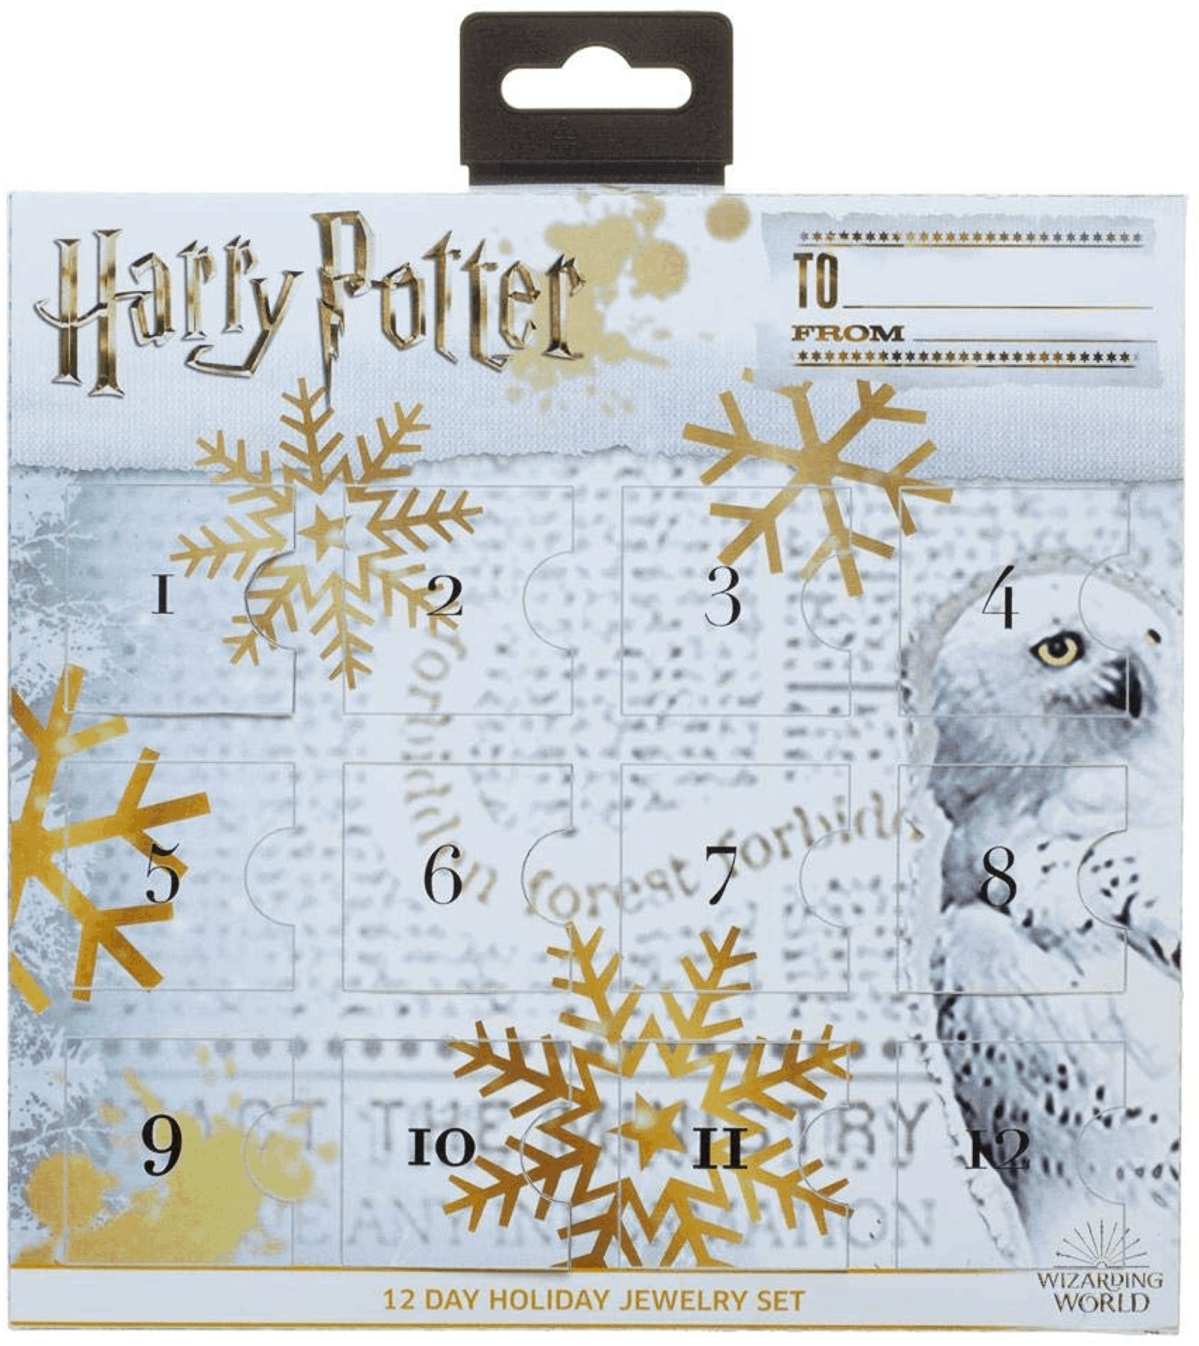 2019 Harry Potter Jewelry Advent Calendar Available Now! Hello